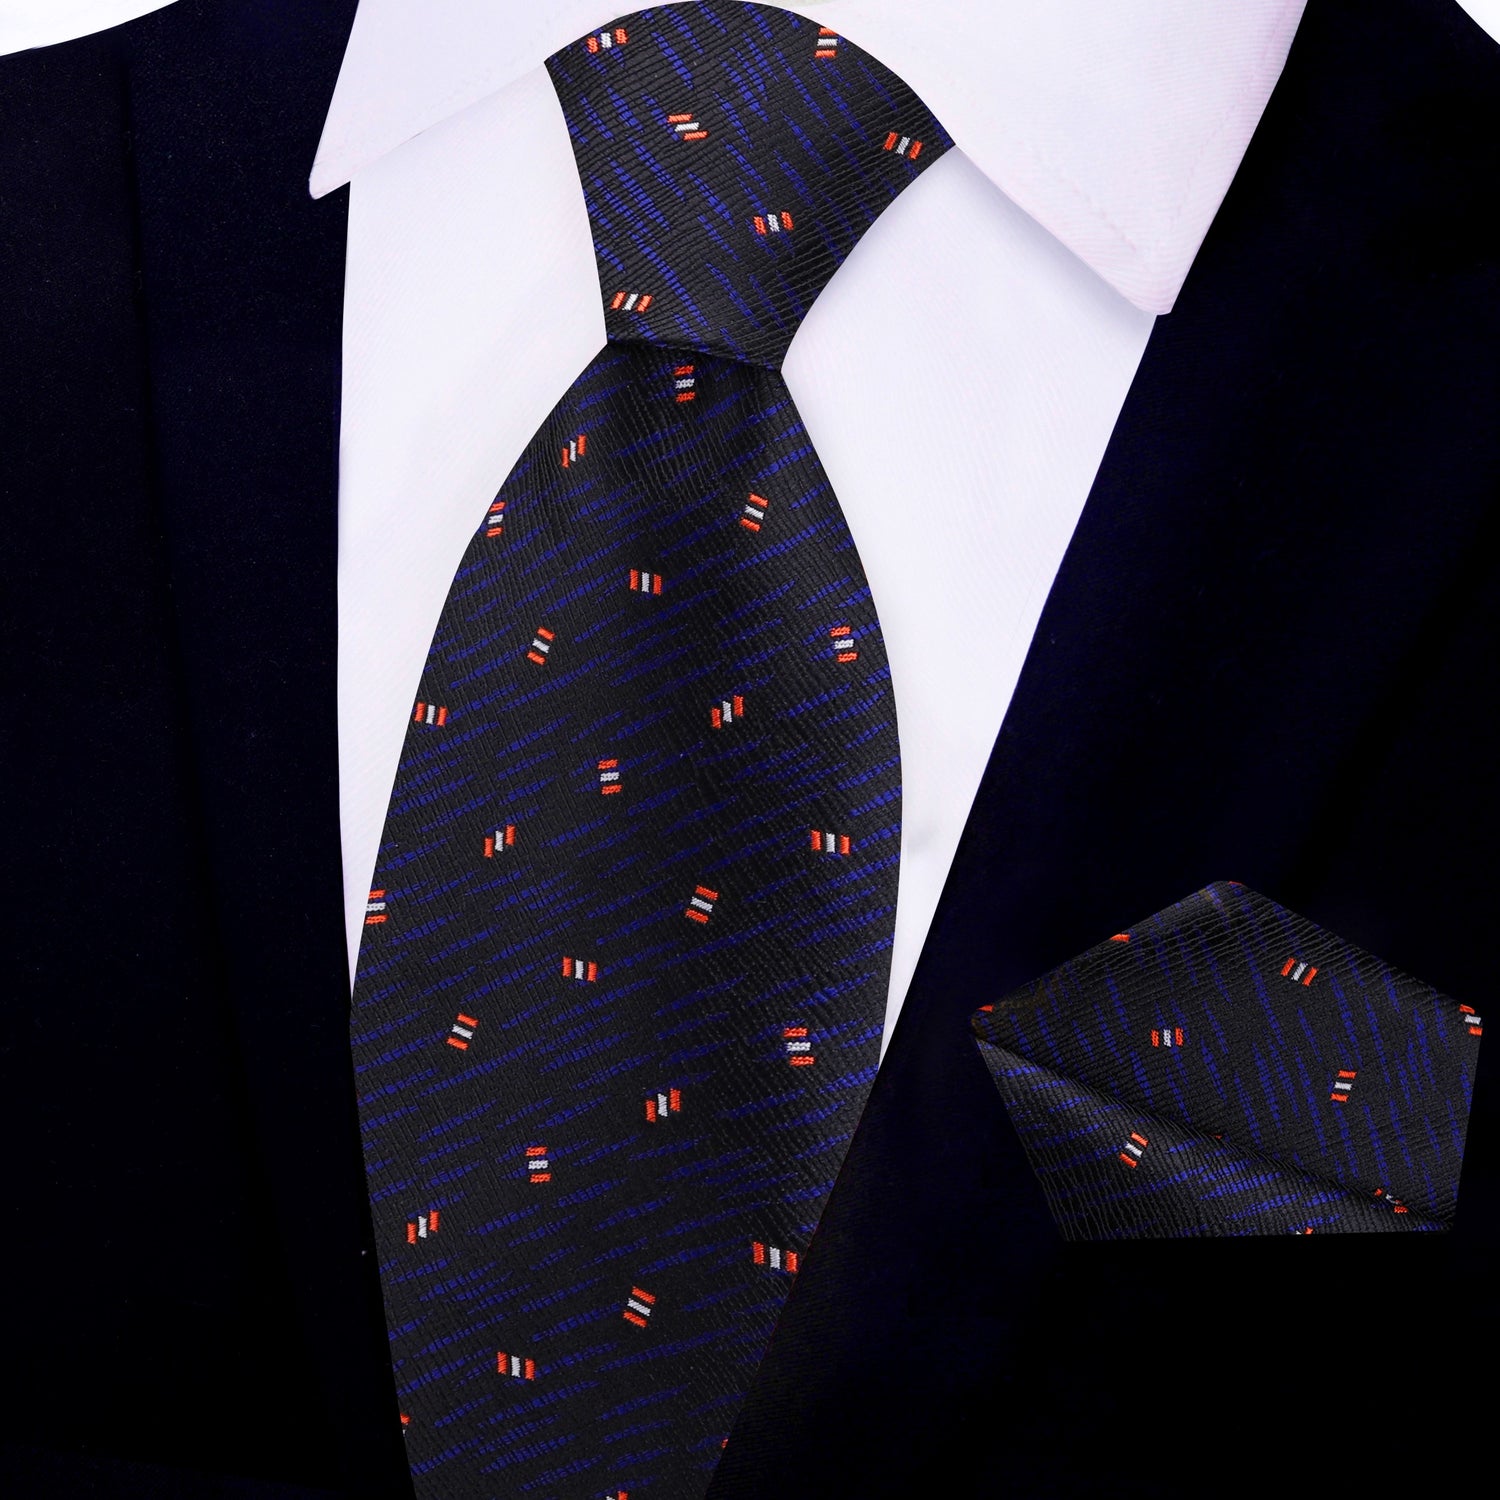 View 2 Black, Dark Indigo, Red, Abstract Tie and Matching Square